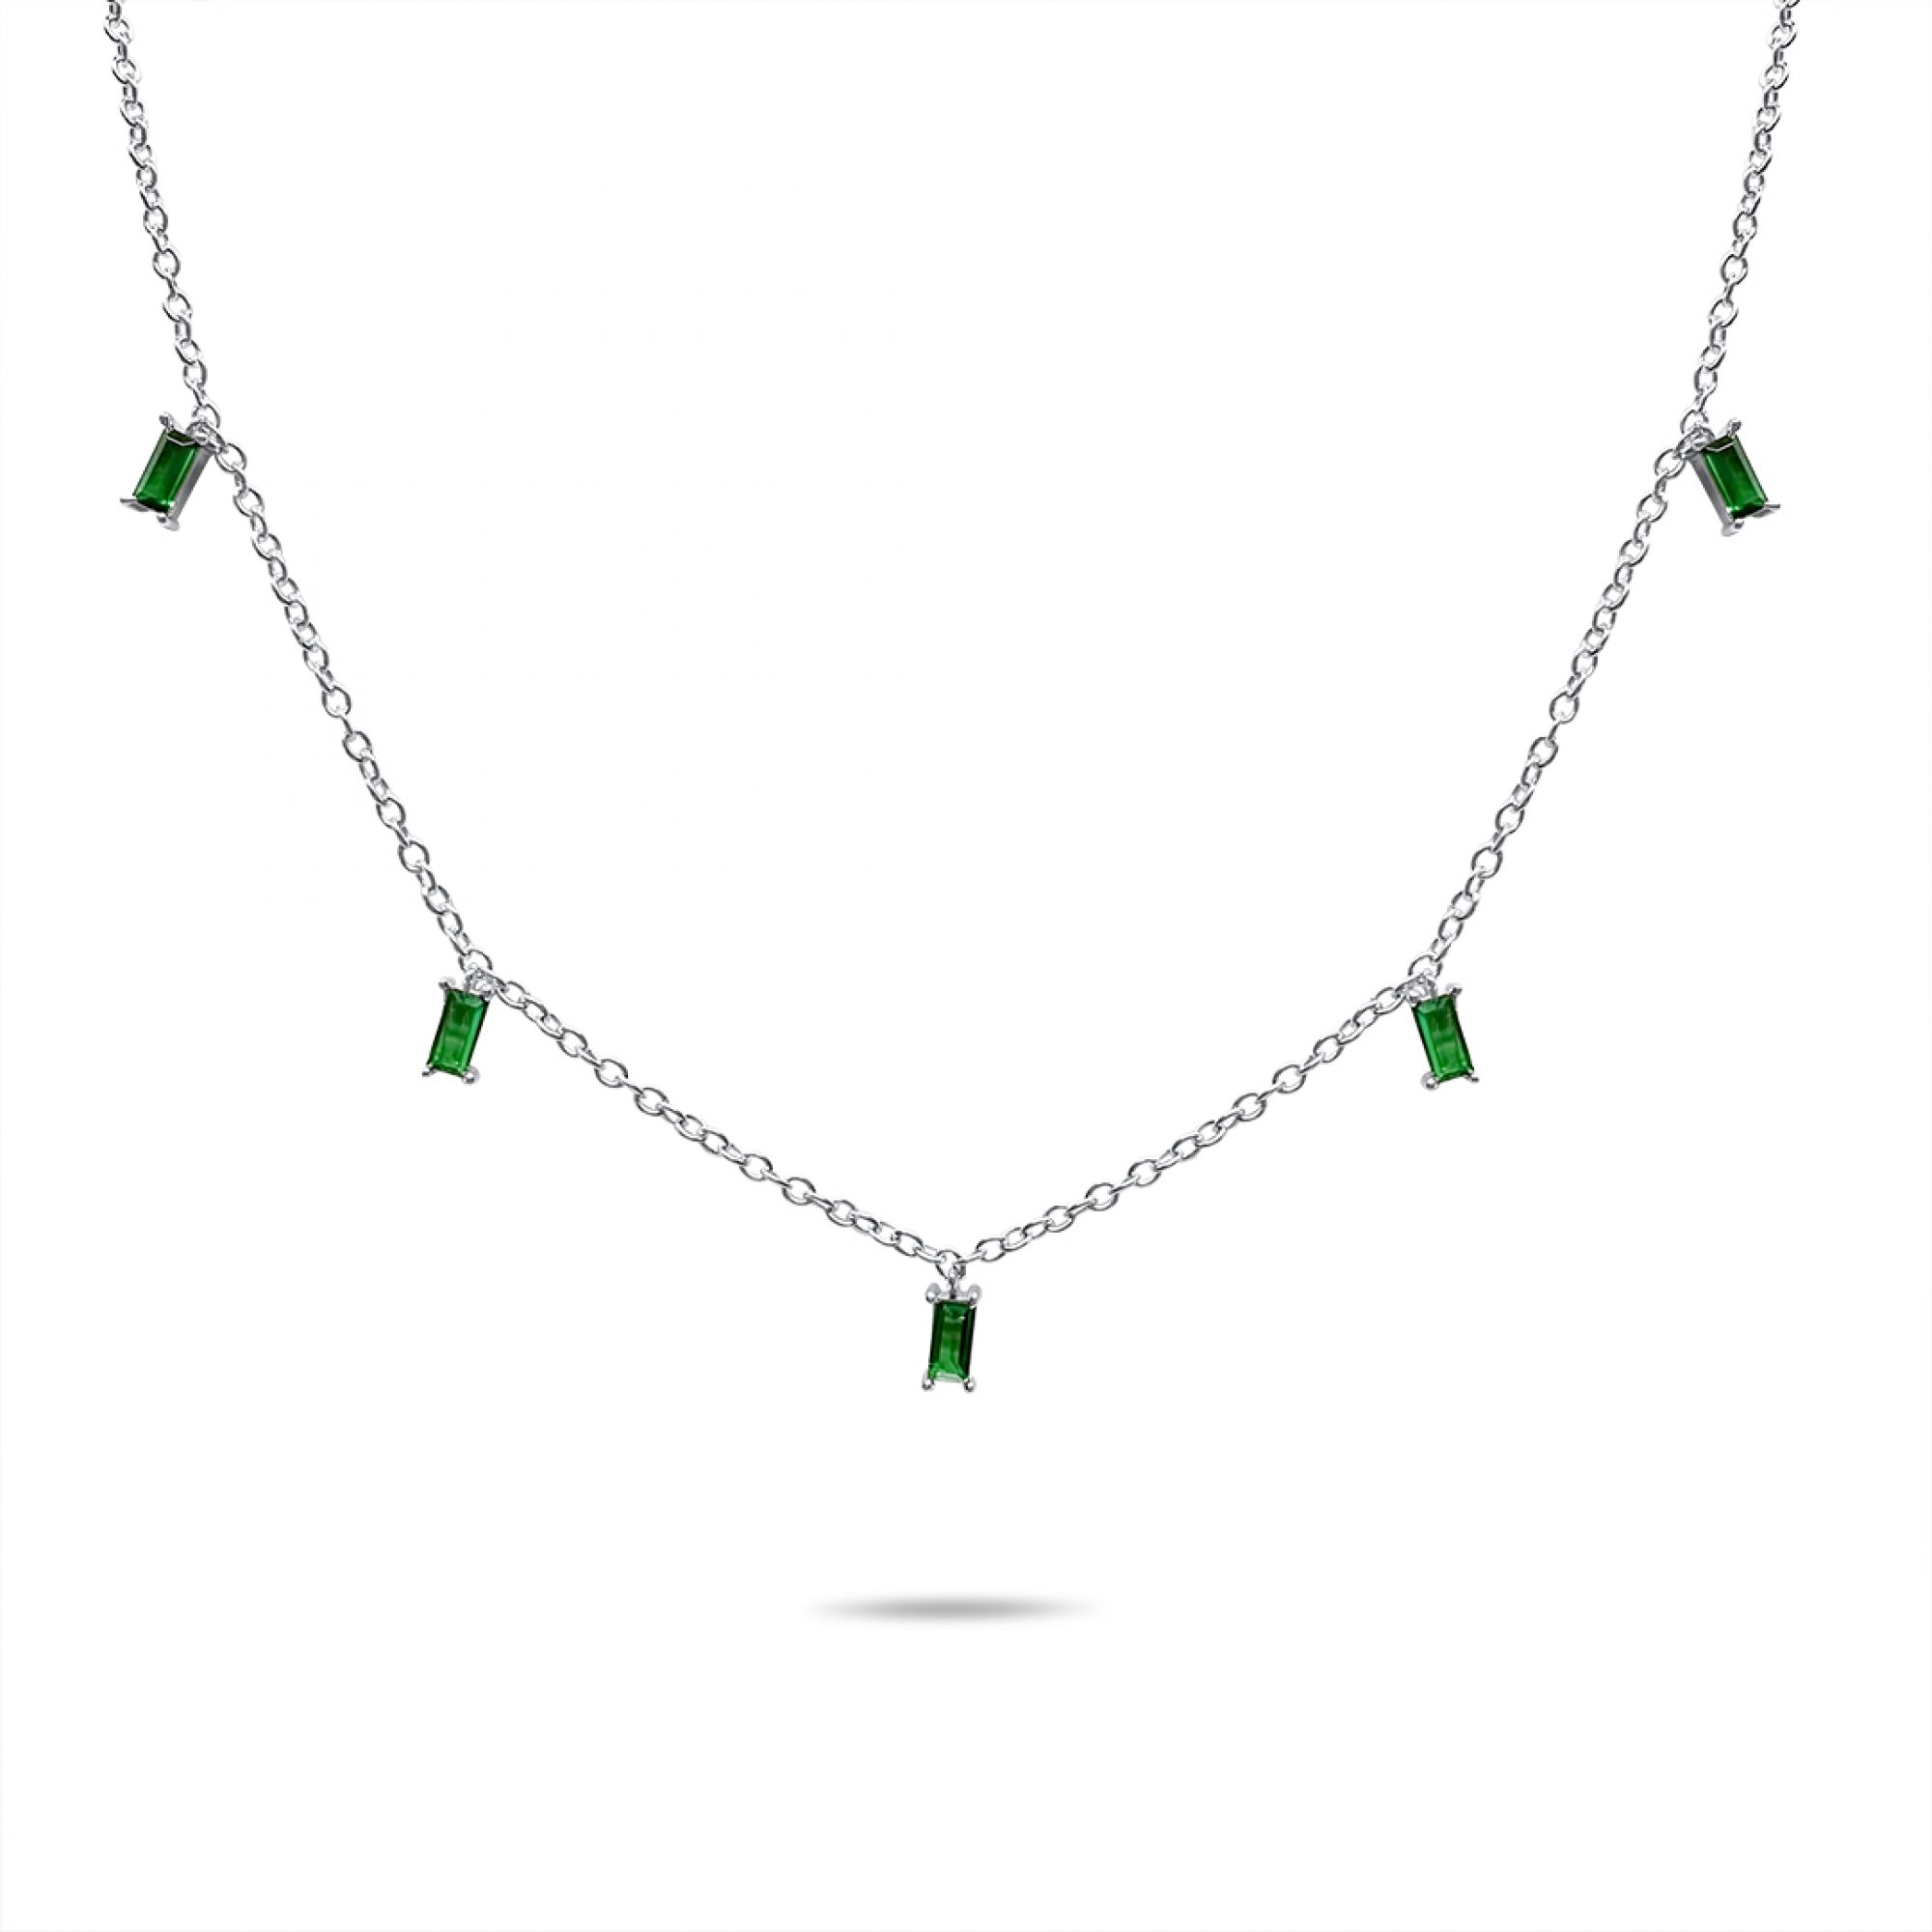 Dangle necklace with emerald stones